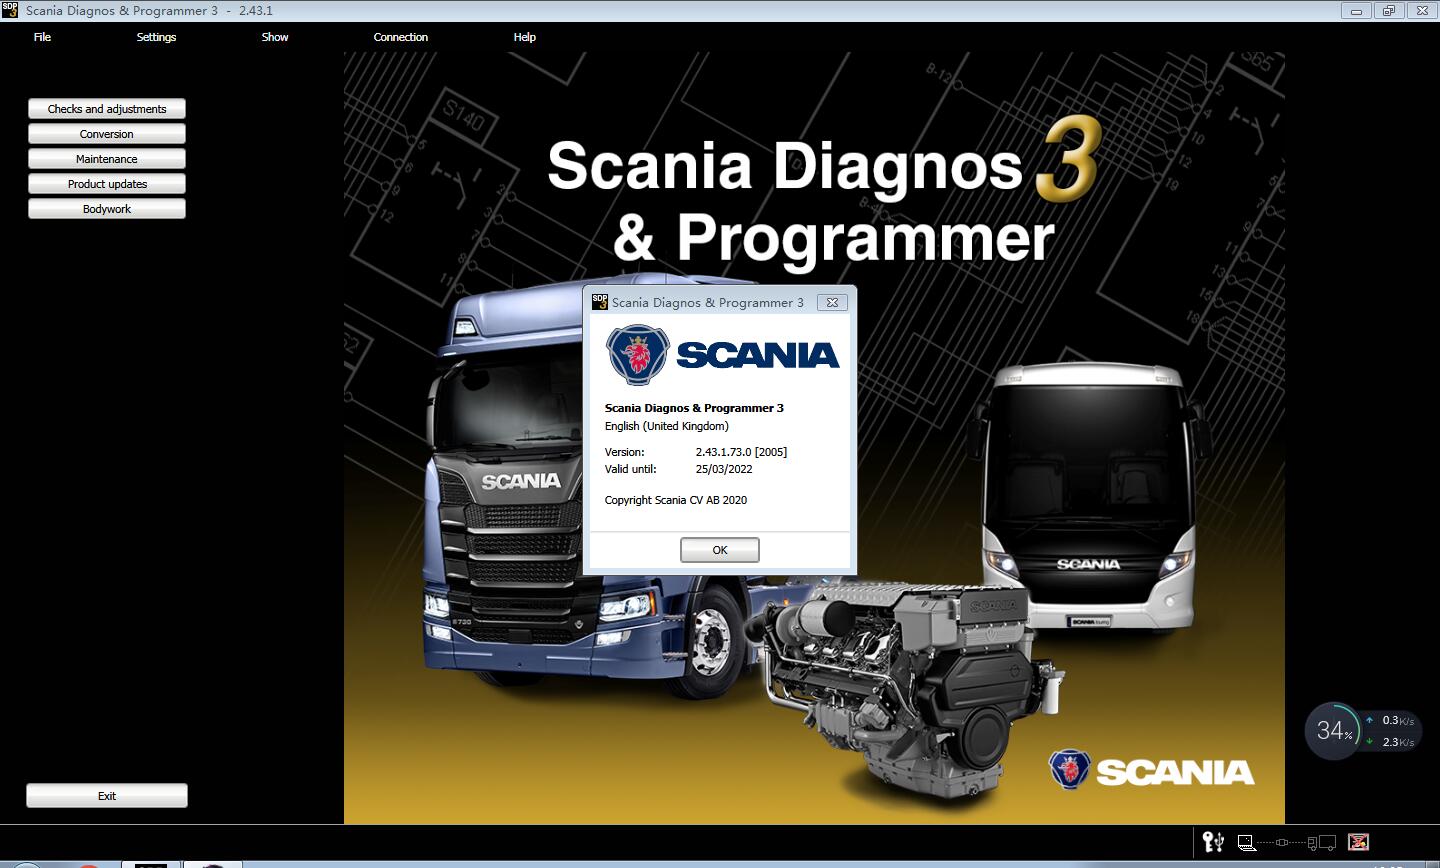 Scania Diagnos & Programmer 3 Version 2.43.1 SDP3  V2. 43.1 is available